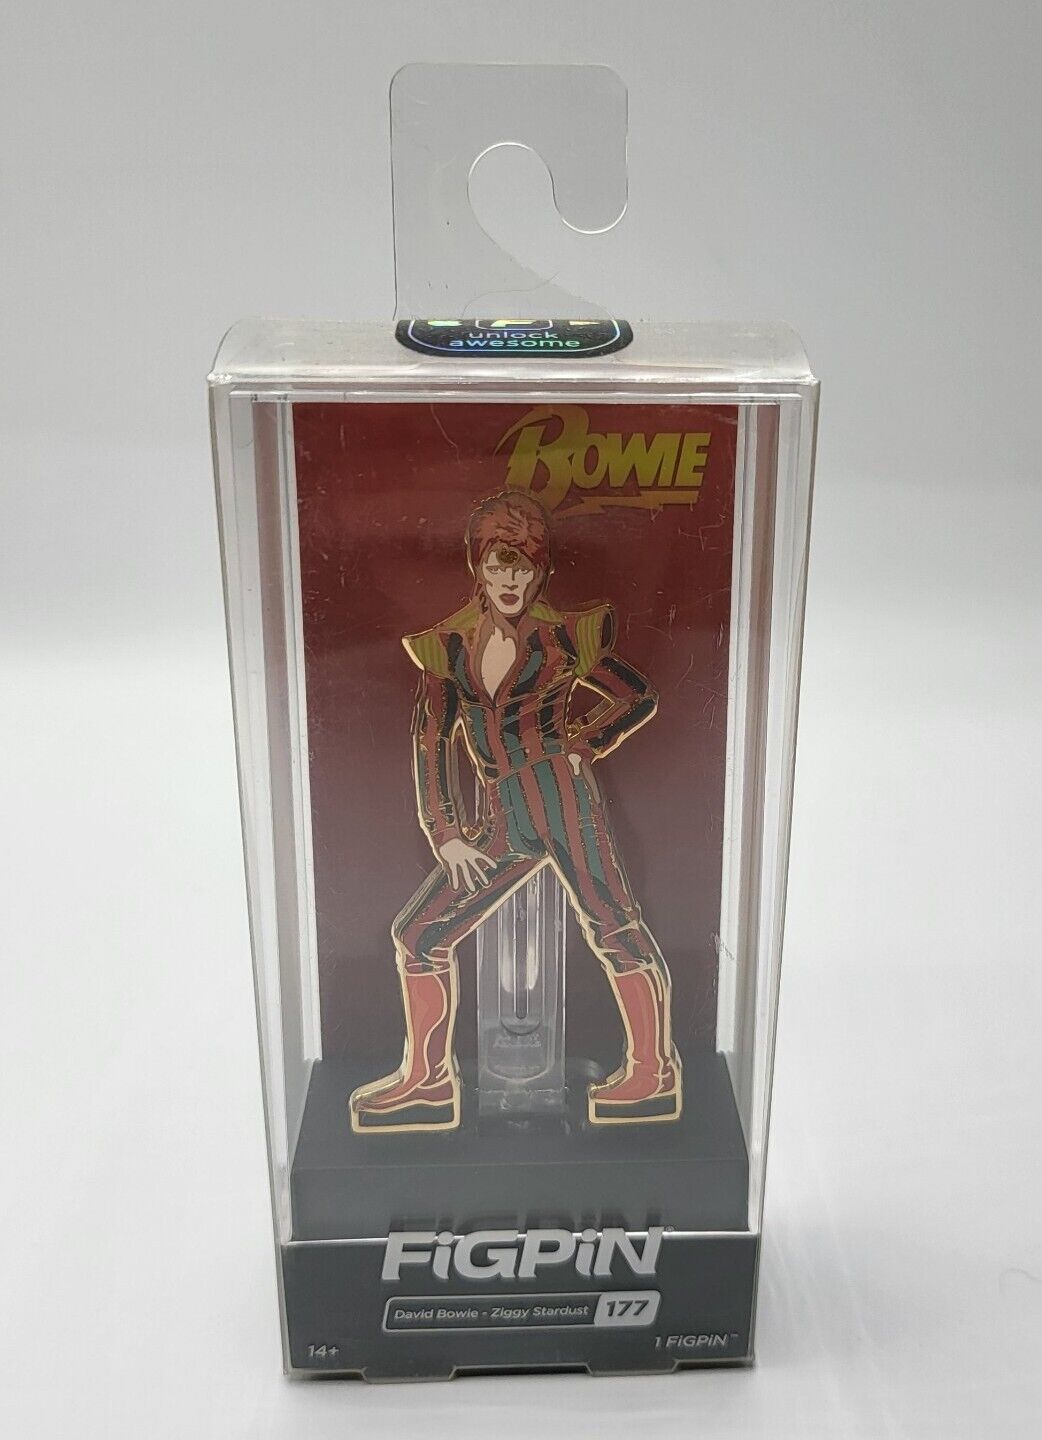 FiGPiN #177 David Bowie Ziggy StarDust Colorful Collectible Enamel Pin NEW